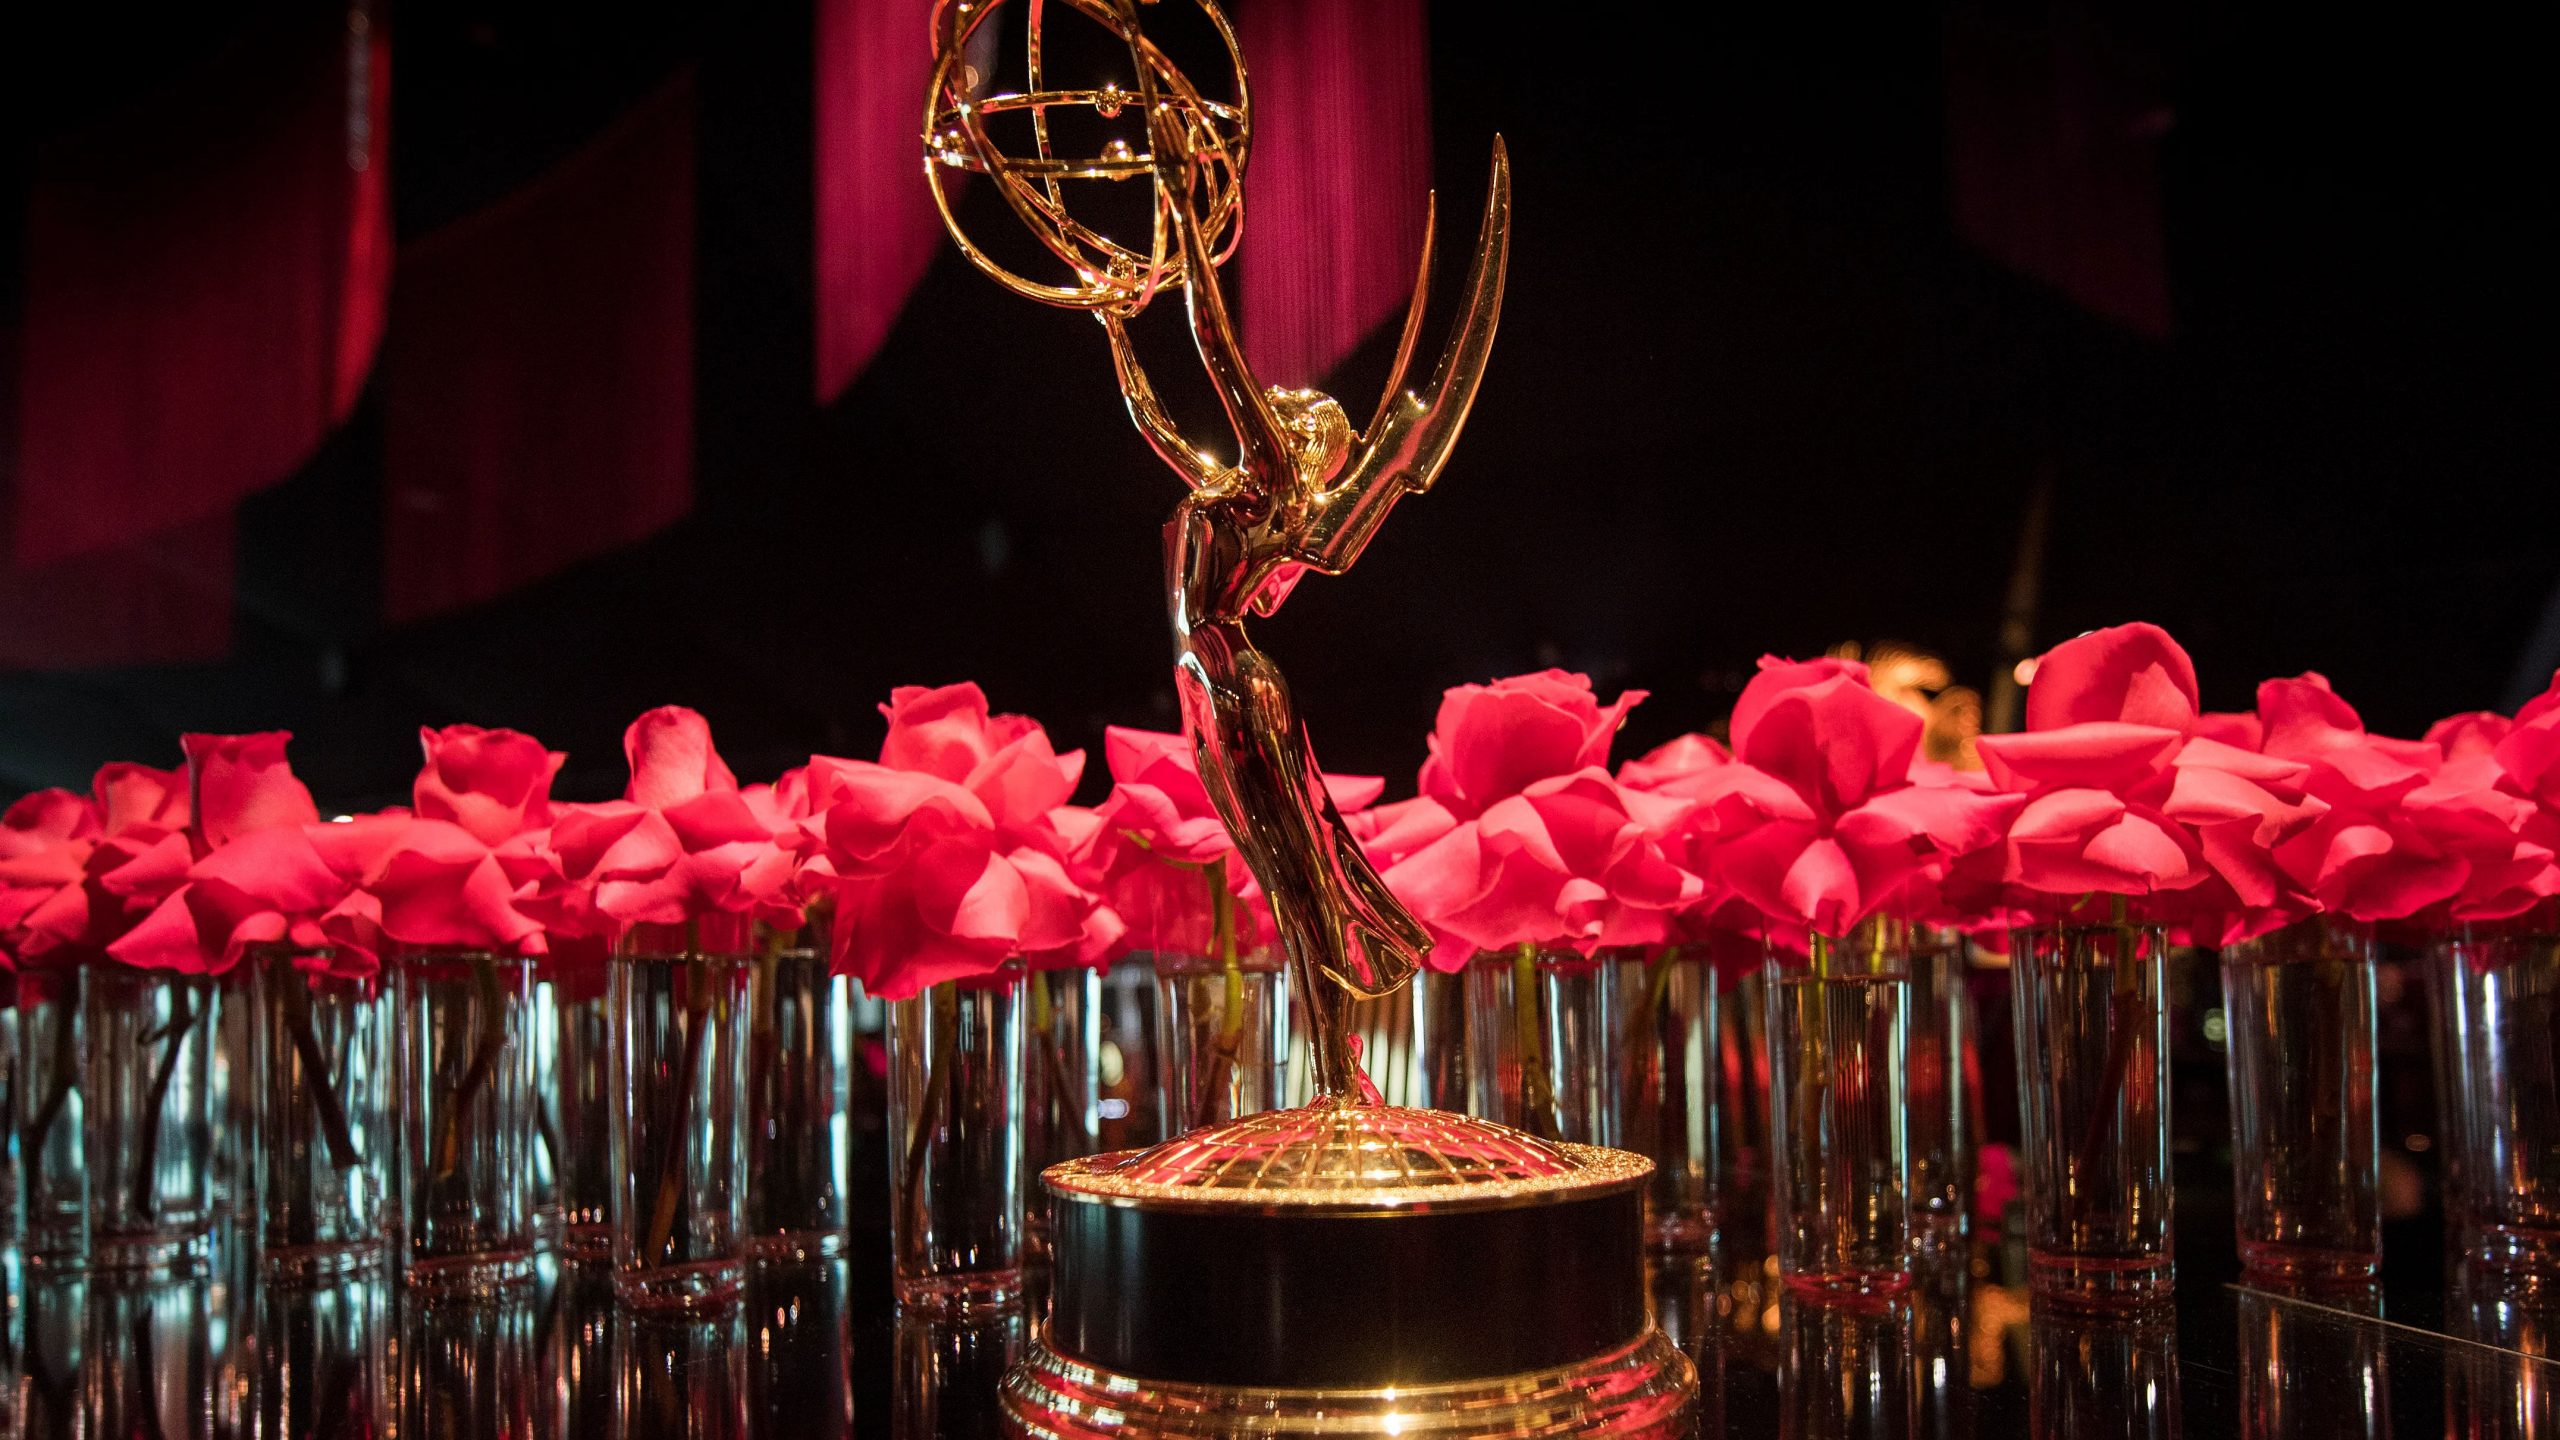 Emmy Awards 2020: Start time, how to watch or livestream ceremony on Sunday